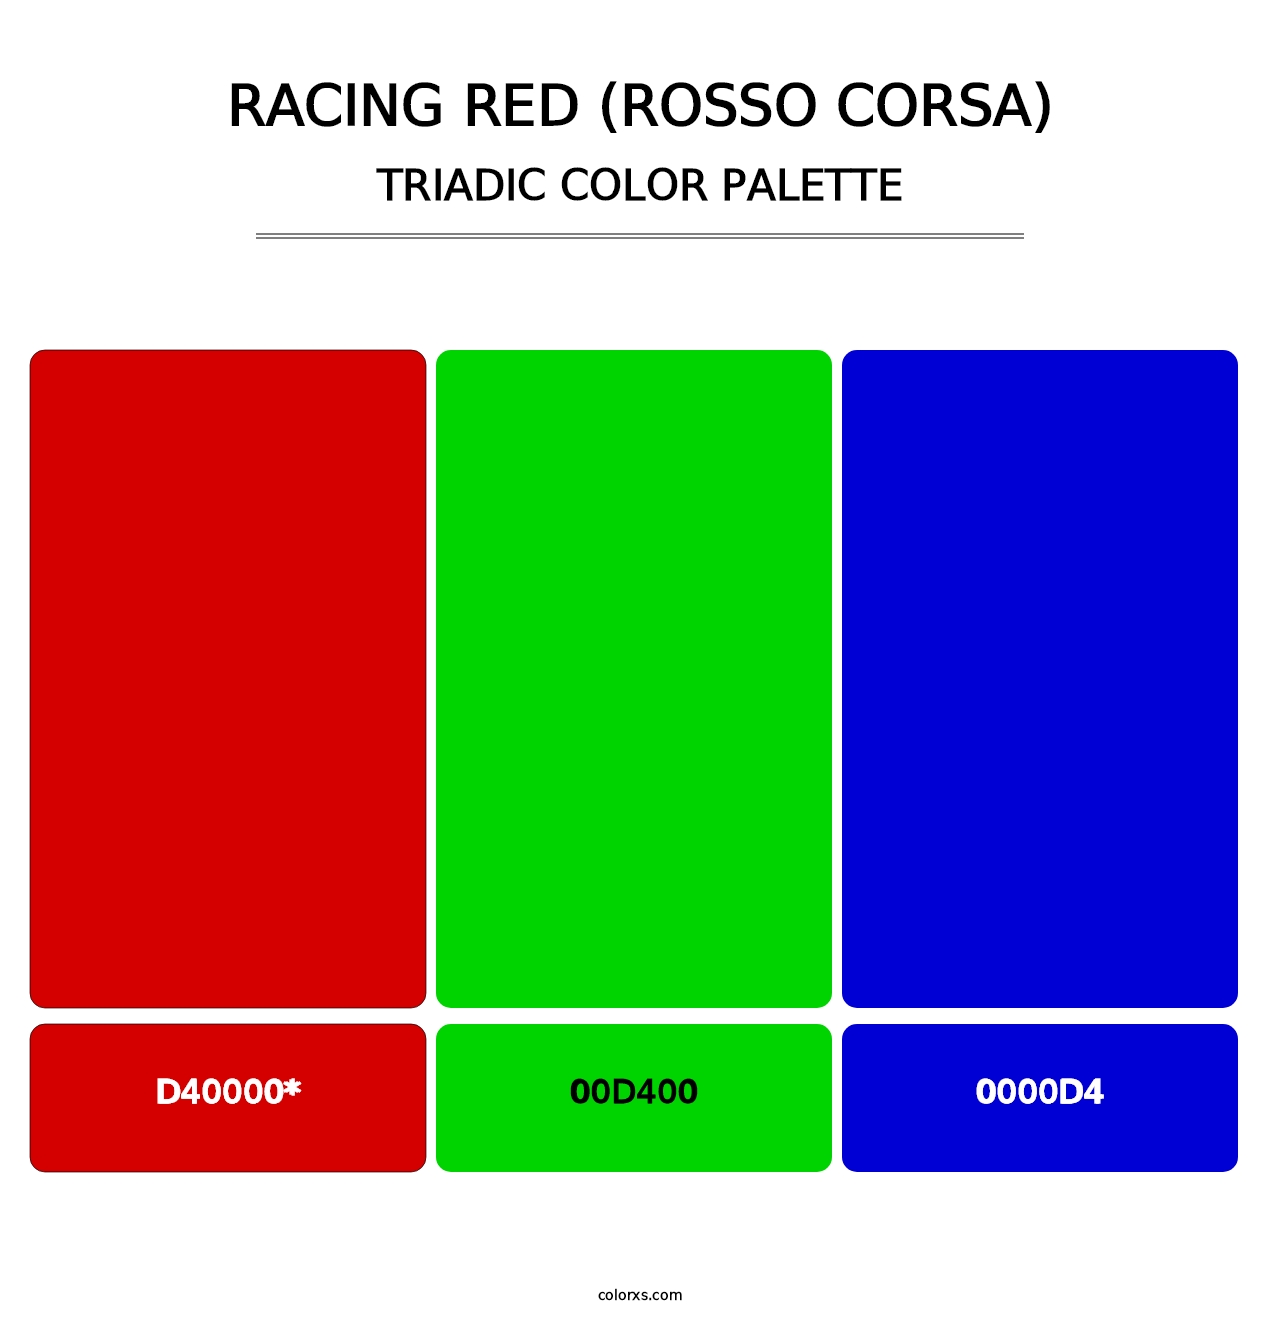 Racing Red (Rosso Corsa) - Triadic Color Palette